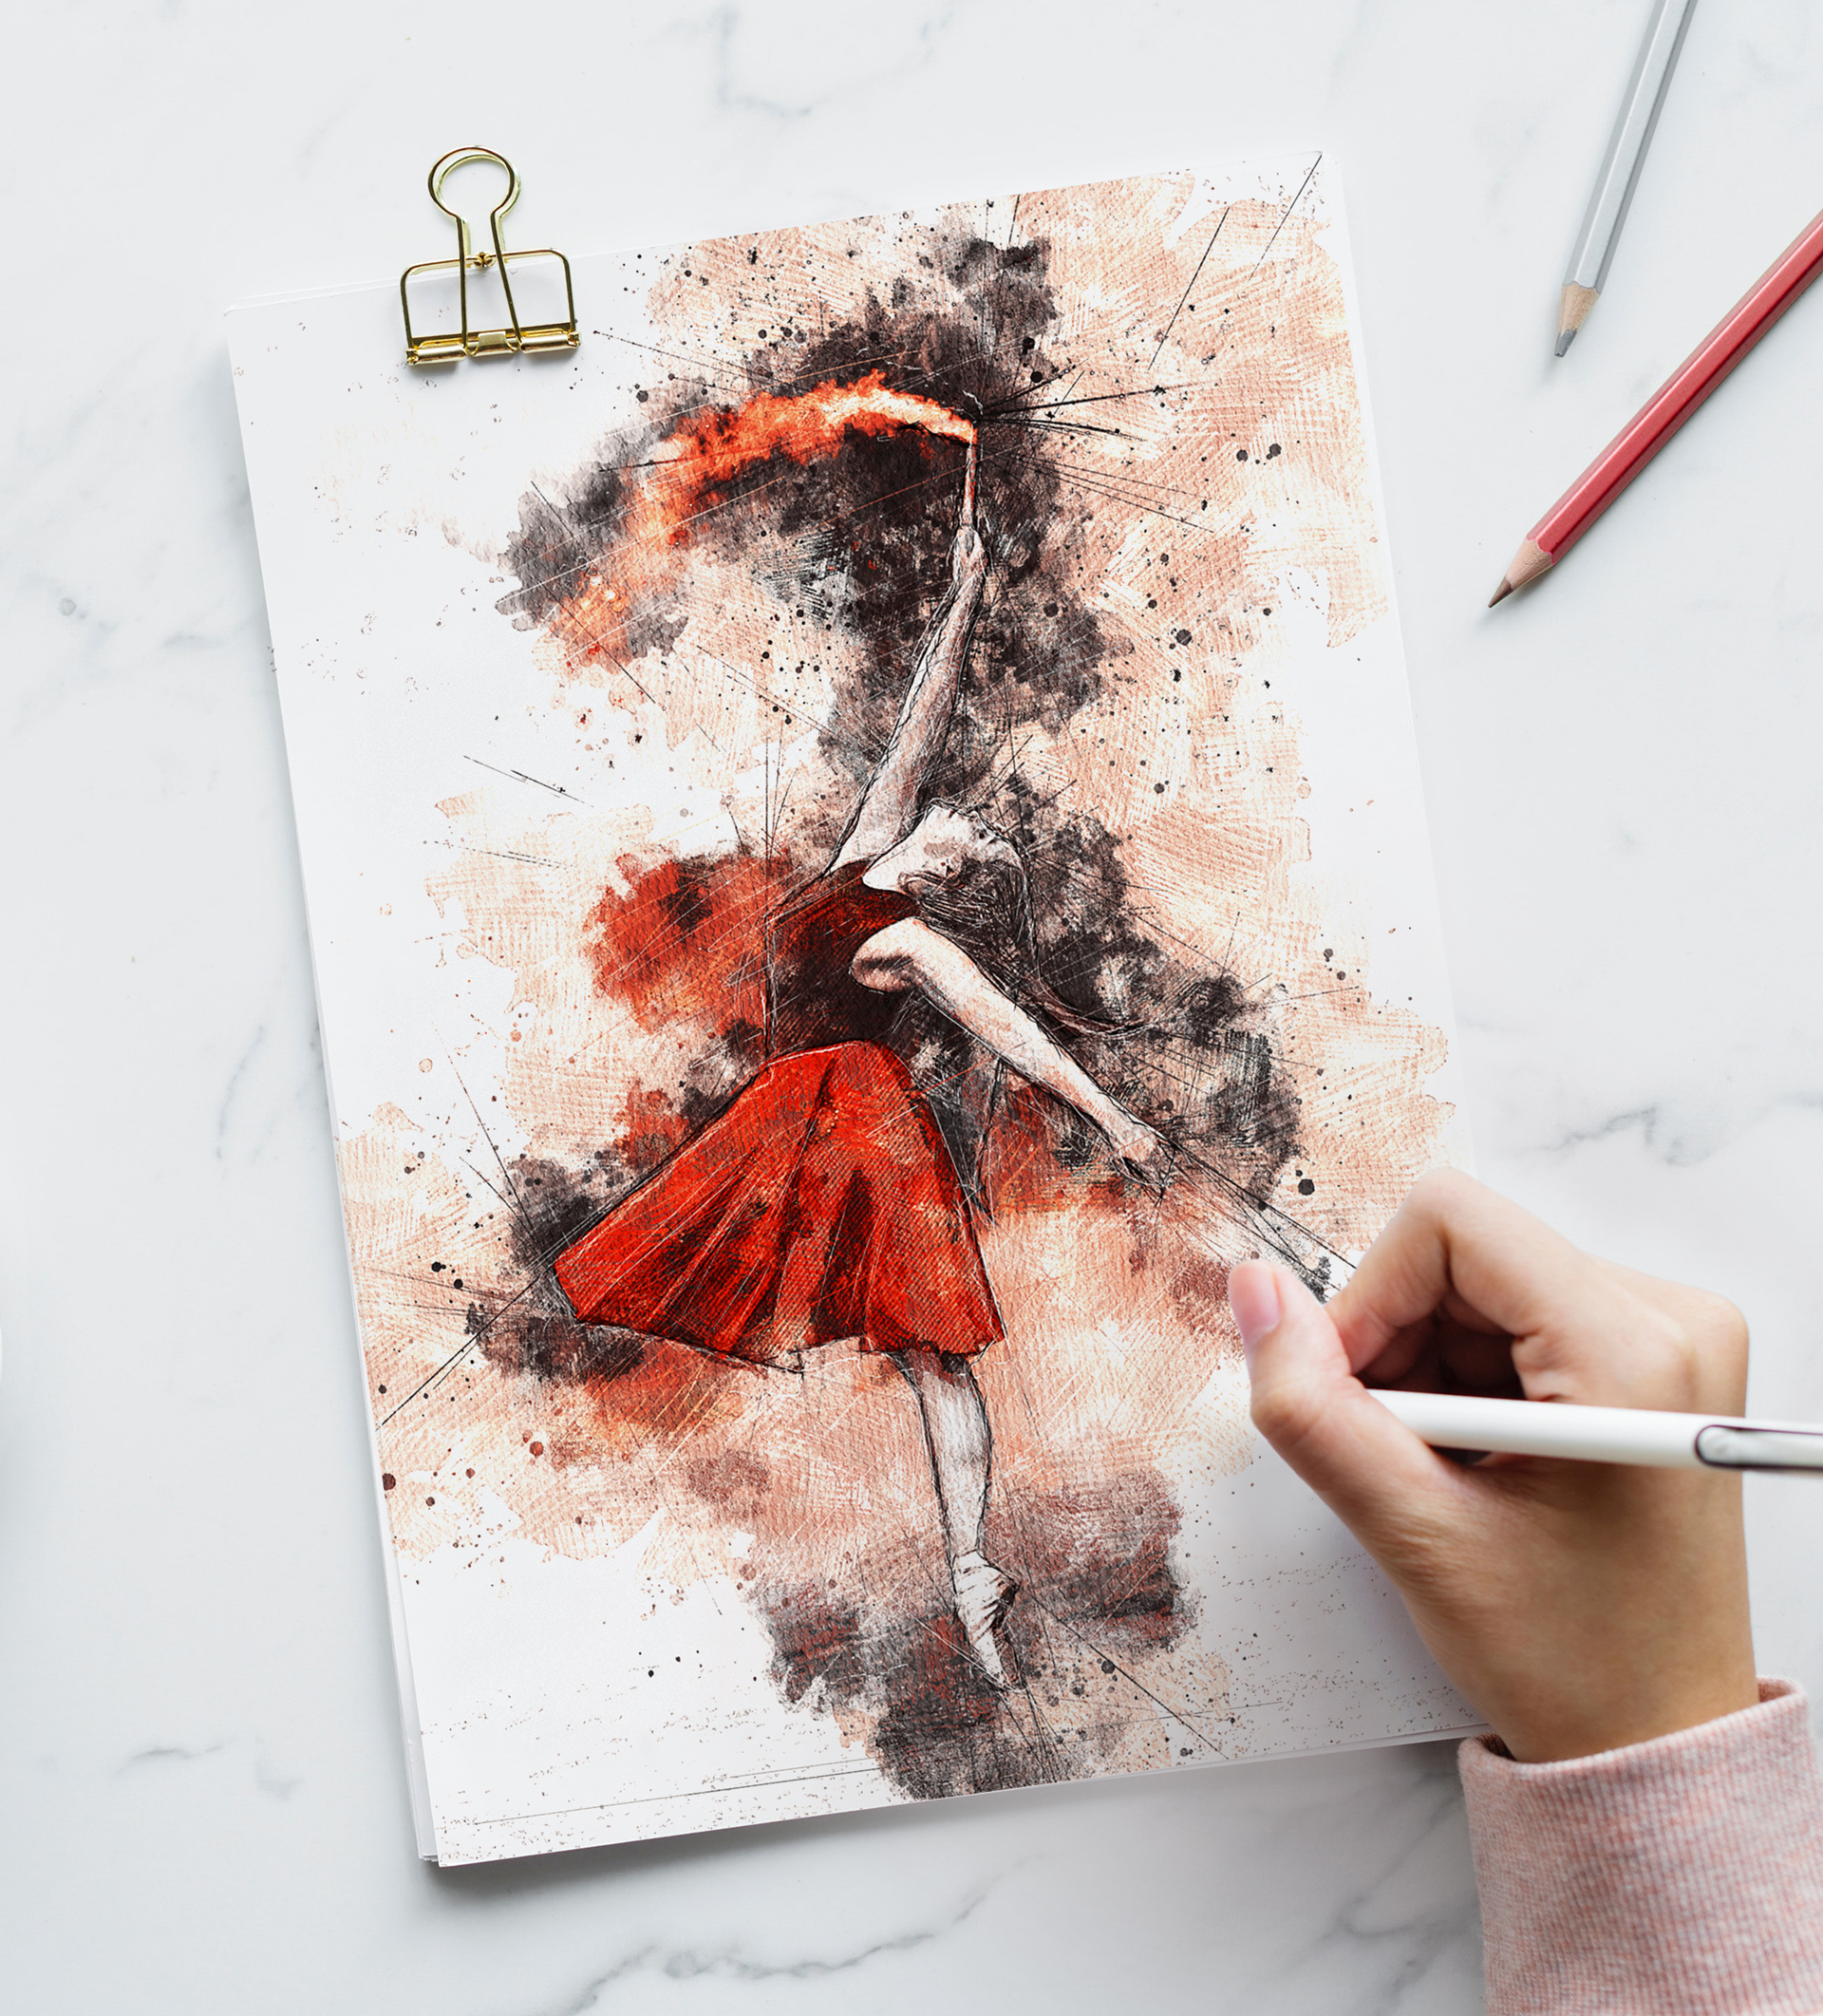 Pencil Drawing Sketch Effect For Adobe Photoshop By Giallo86